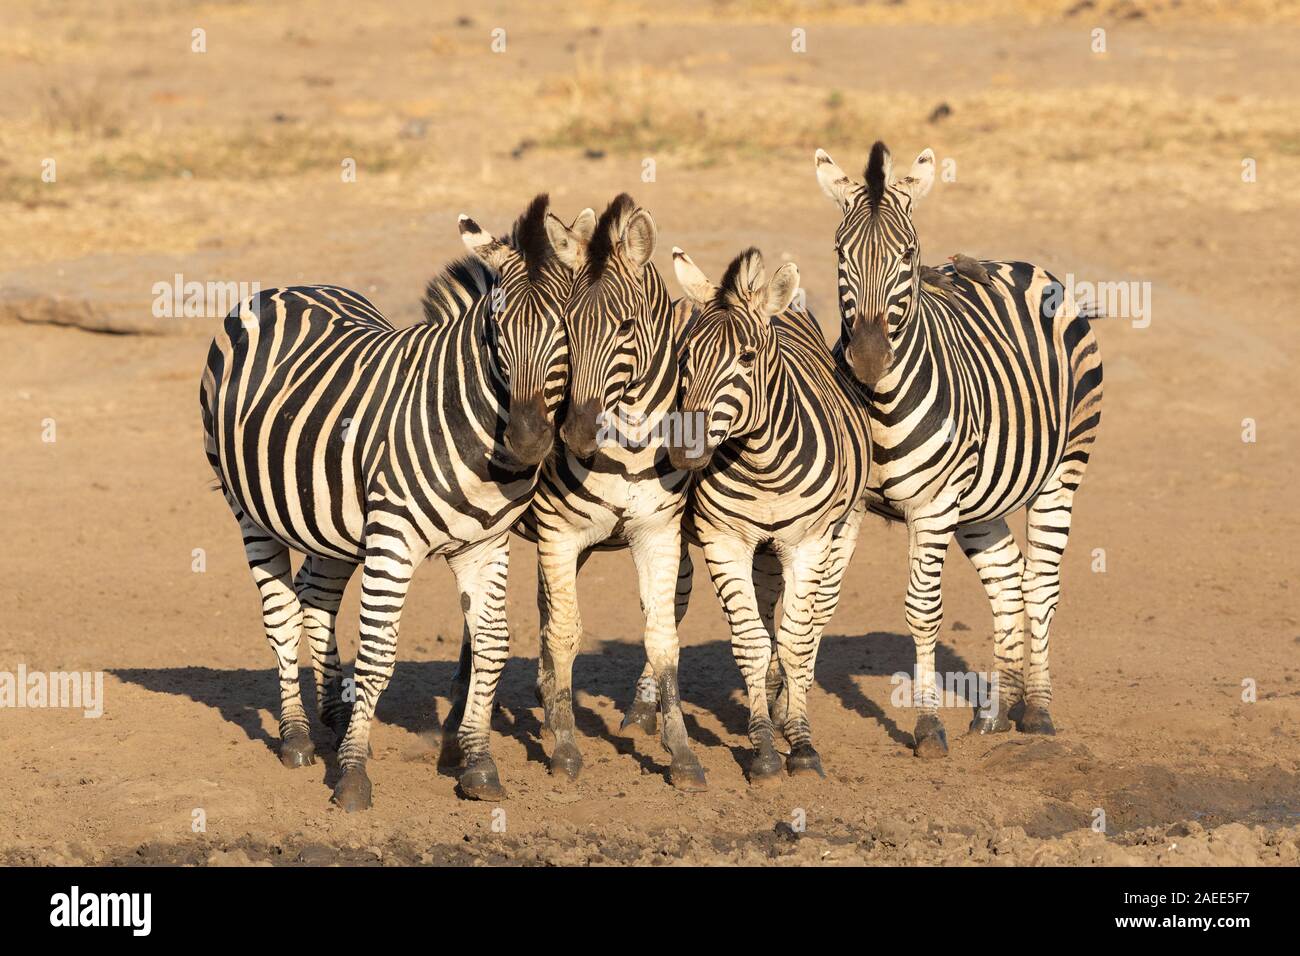 Four zebras standing close together on dry soil in Kruger Park in South Africa Stock Photo